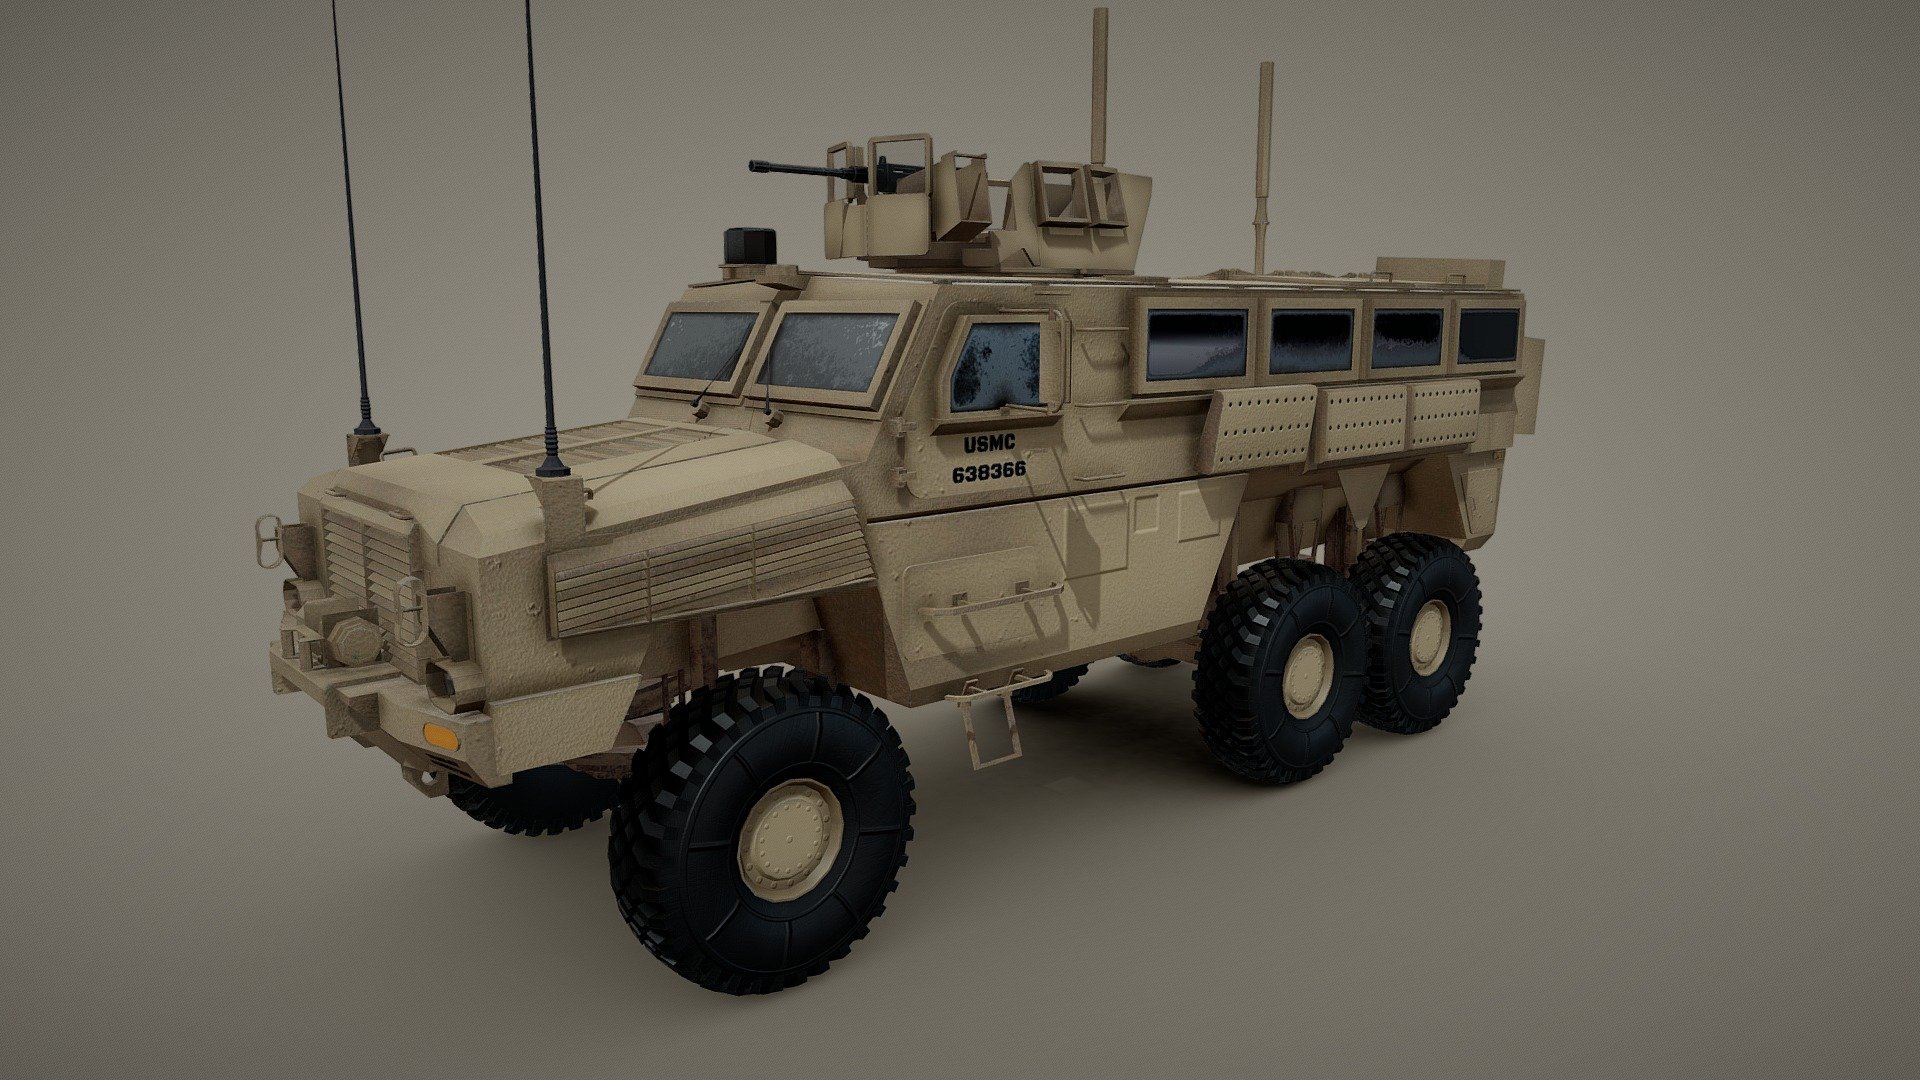 The RG-33 is a mine-resistant light armored vehicle initially designed by BAE Systems Land Systems South Africa (formerly Land Systems OMC) a South African subsidiary of BAE Systems. BAE Systems in the US extensively modified it with additional protection, new powertrain, and suspension systems. It was built in a number of locations including York, Pennsylvania. It was one of several vehicles being fielded by the US Armed Forces in Iraq under the MRAP program 3d model